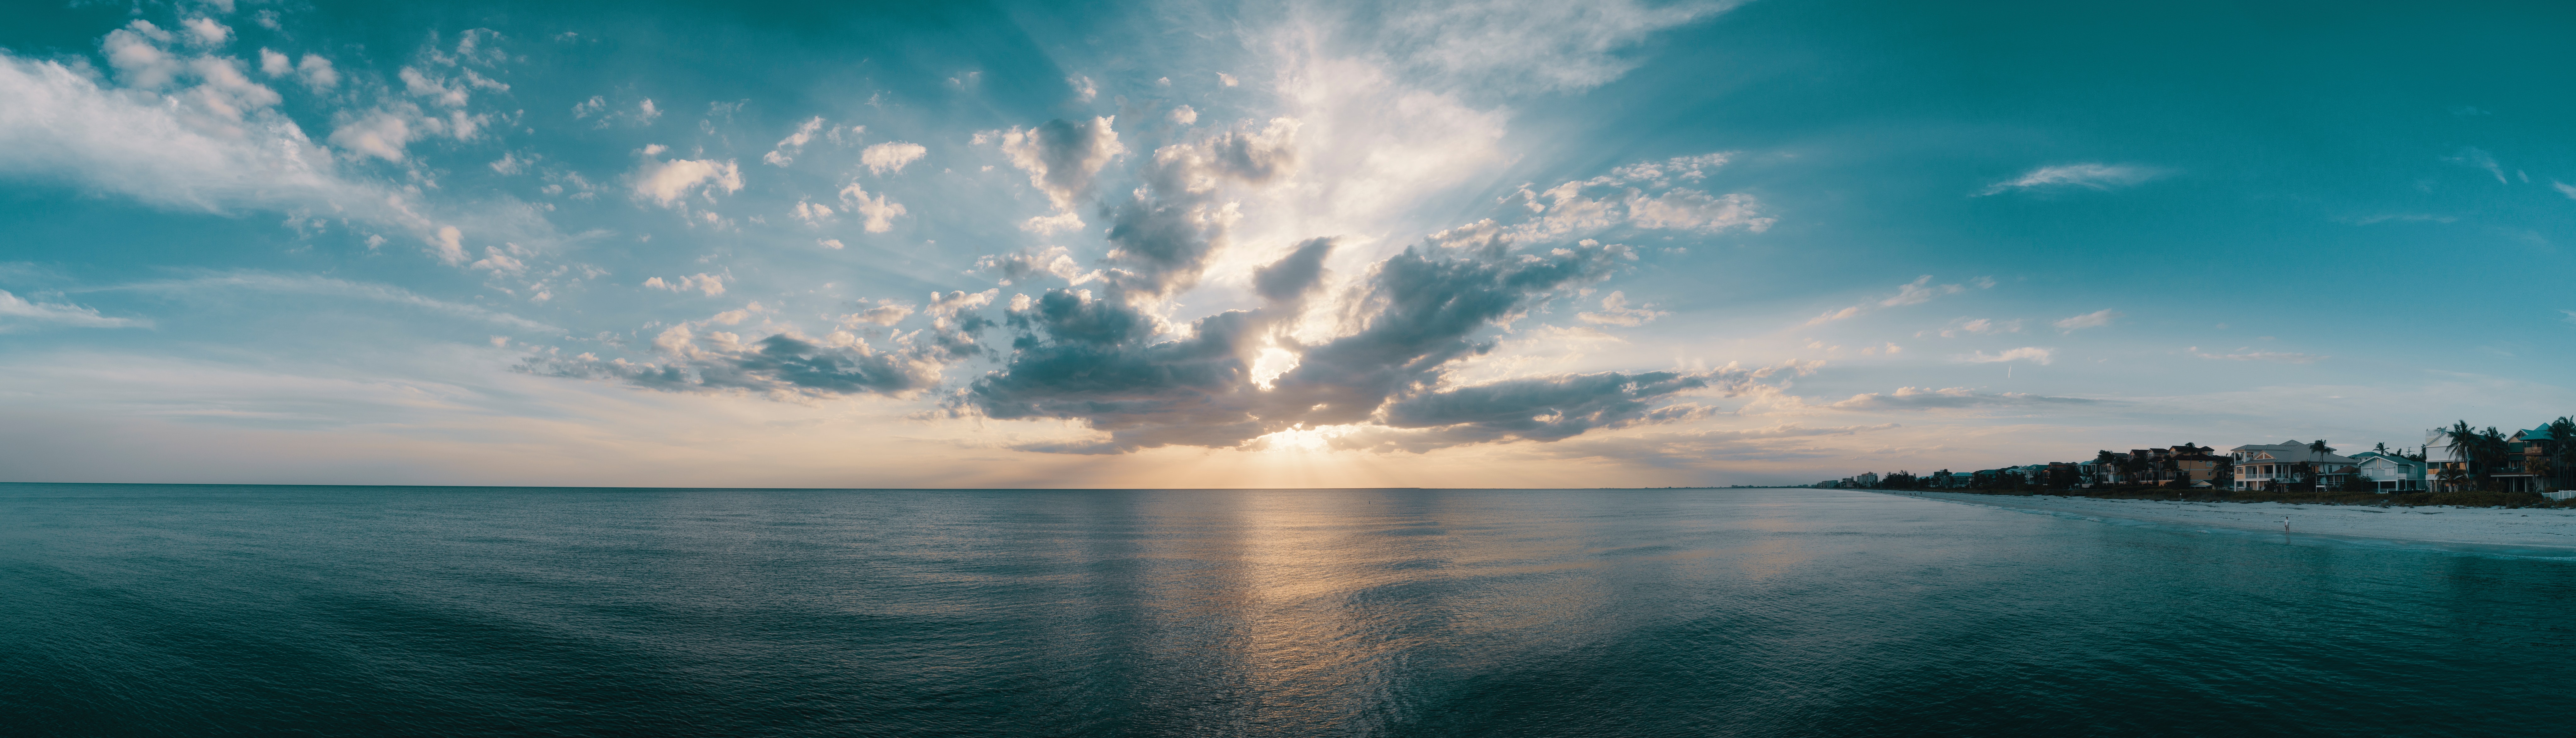 Landscape photo of the ocean and clouds